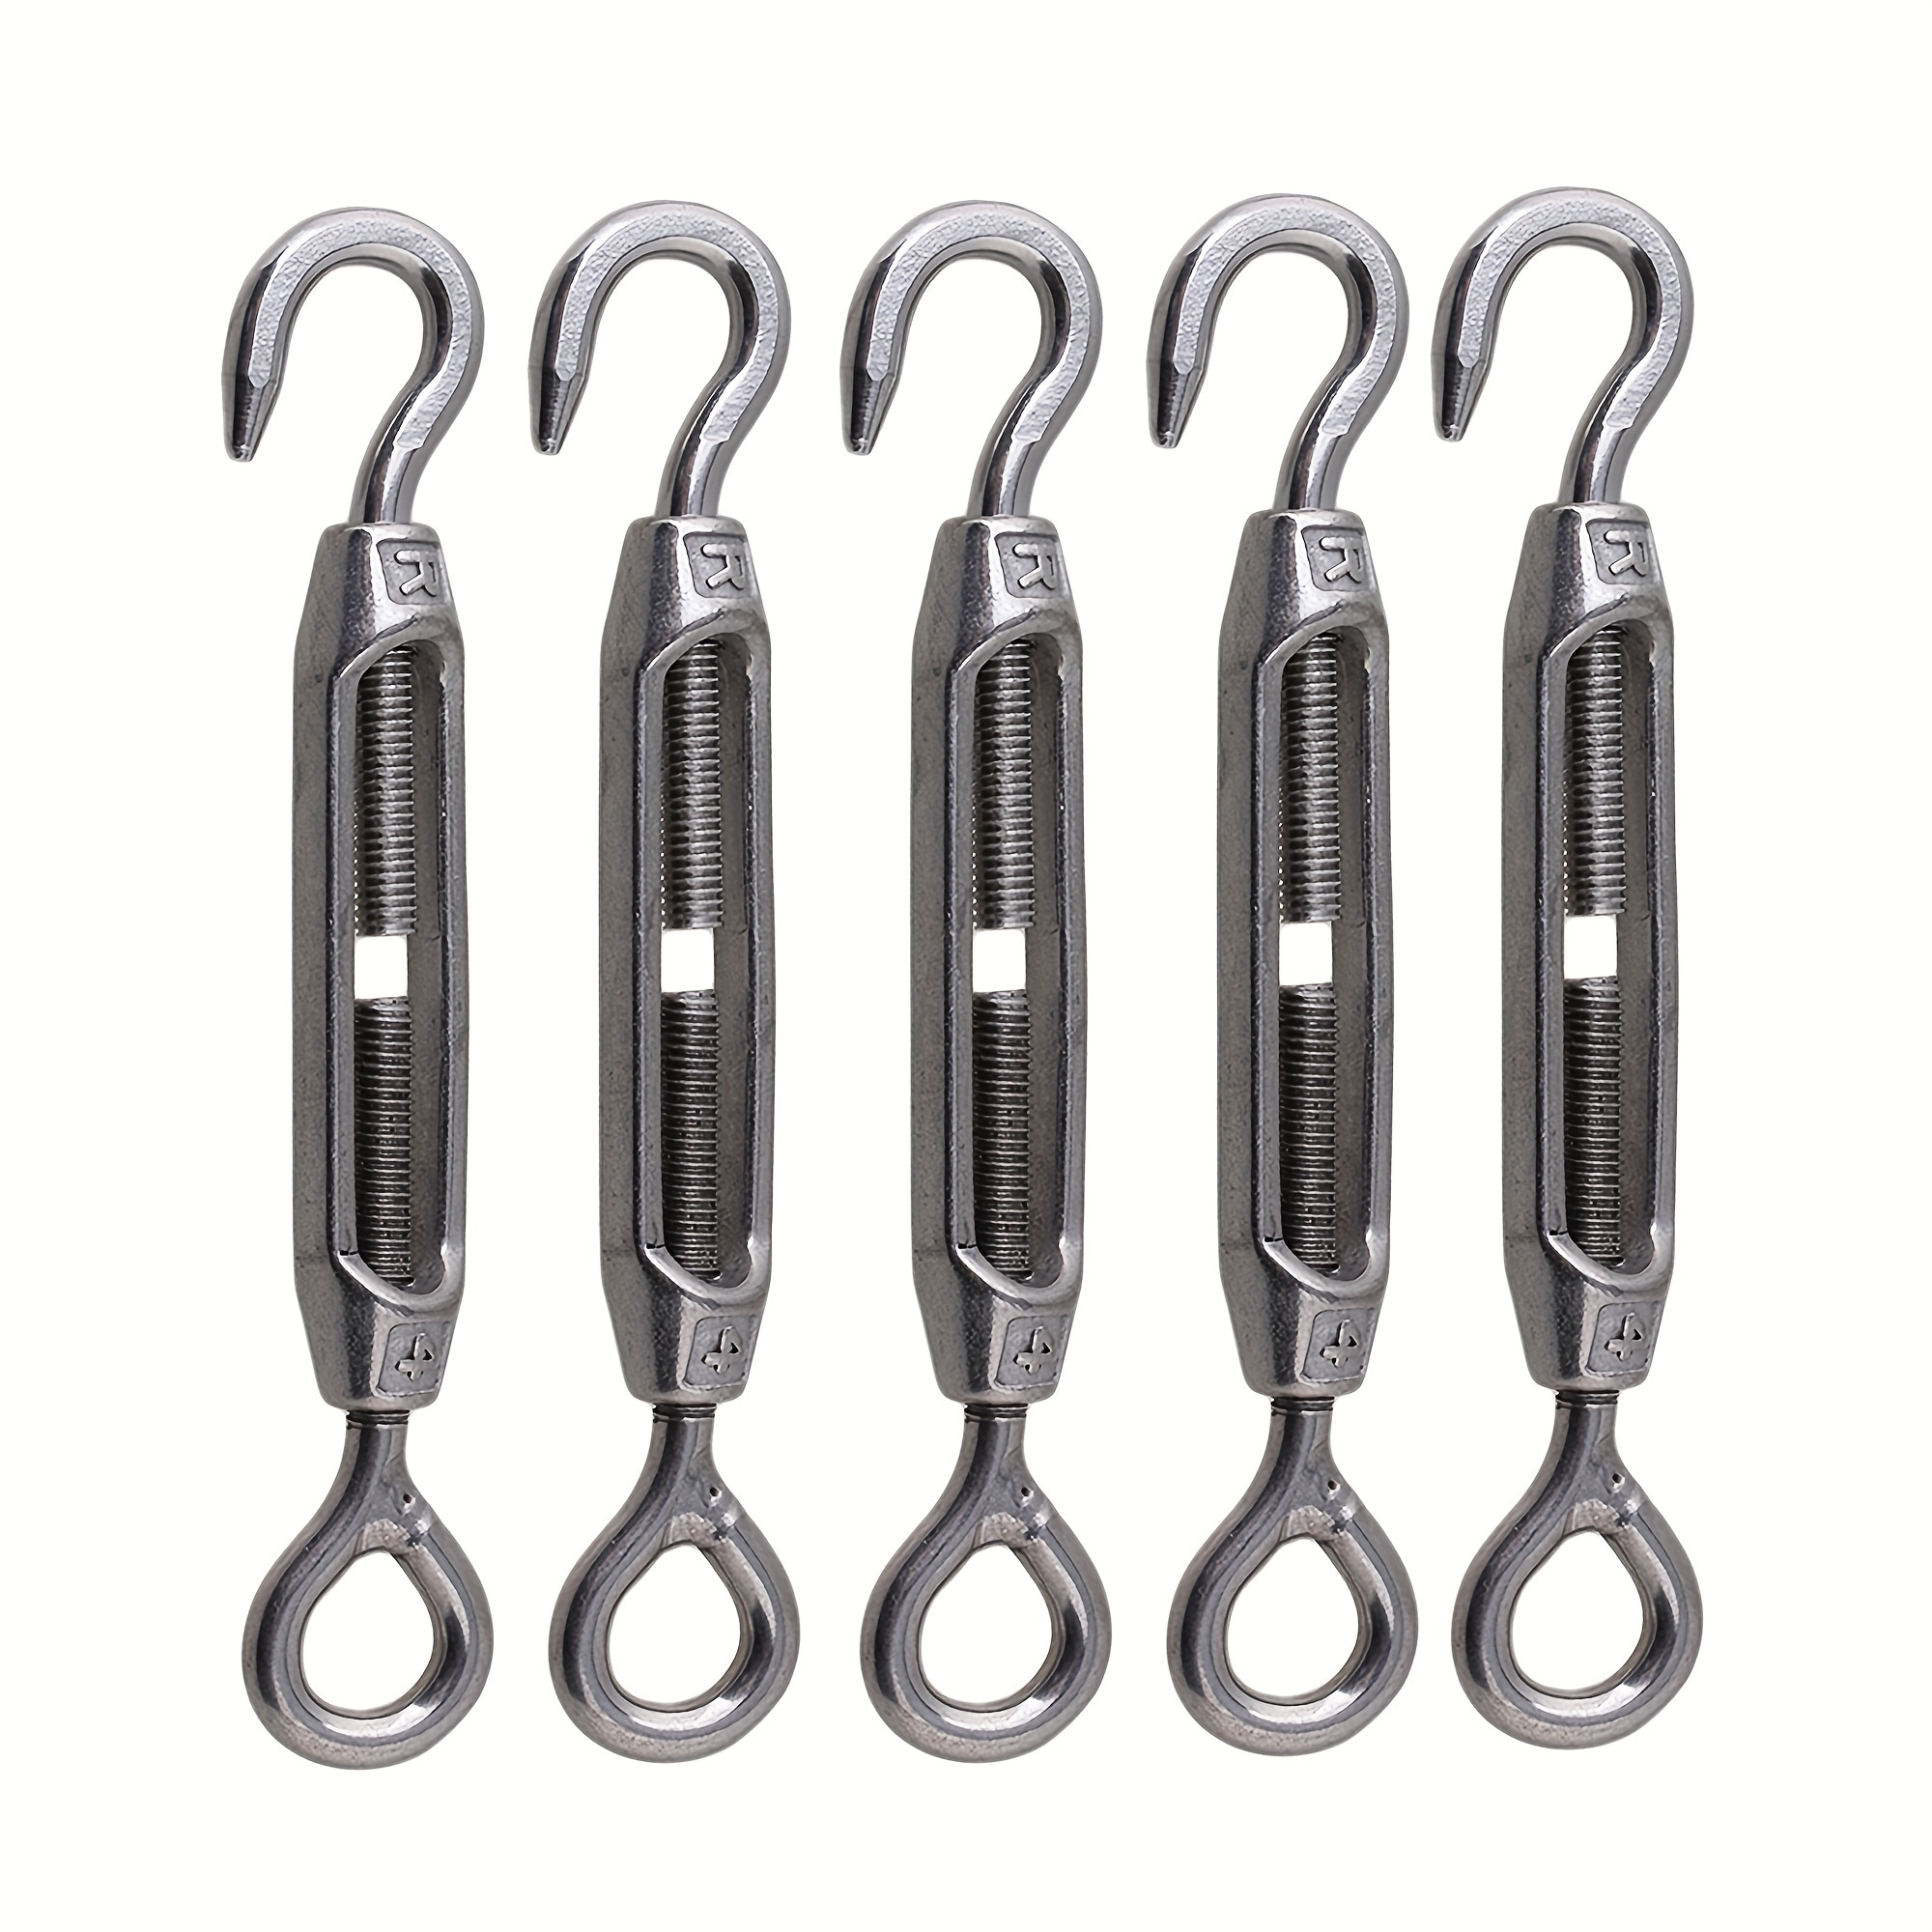 

5pcs European-style M4 Open Body Turnbuckles, 304 Stainless Steel, Oc Type, Adjustable 3.15"-4.25", With 0.39" Eye Diameter For Sun Shades, Tents, Outdoor Use